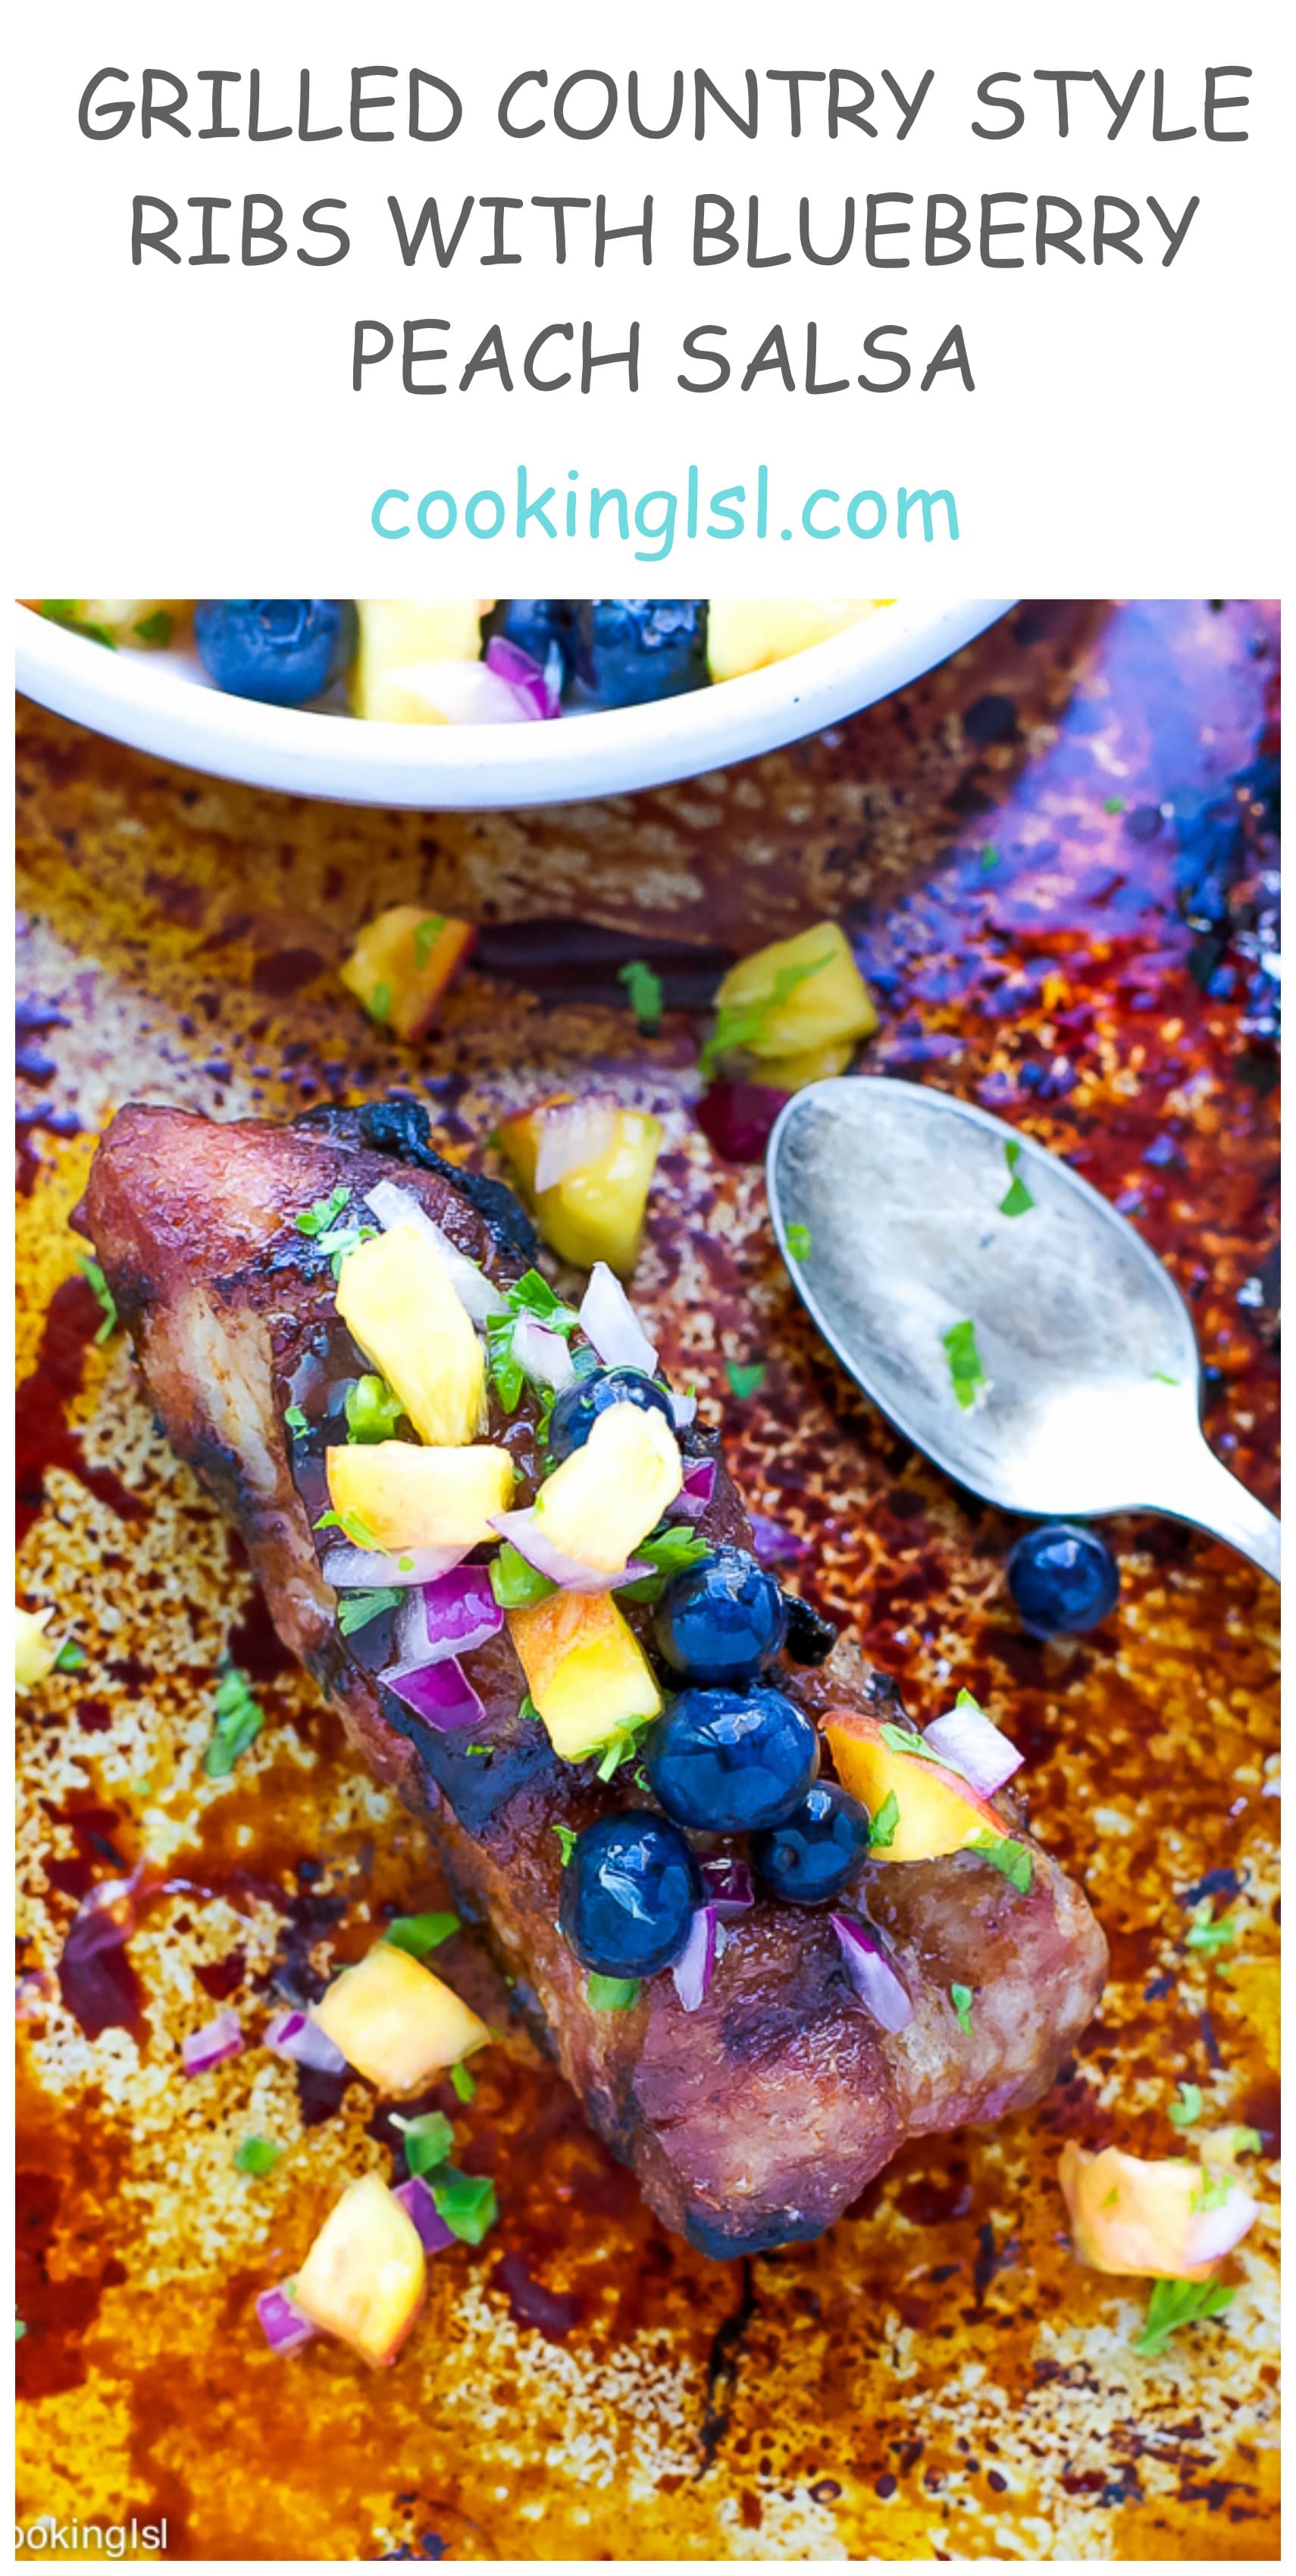 Grilled-Country-Style-Pork-Shoulder-Ribs-With-Blueberry-Peach-Salsa 